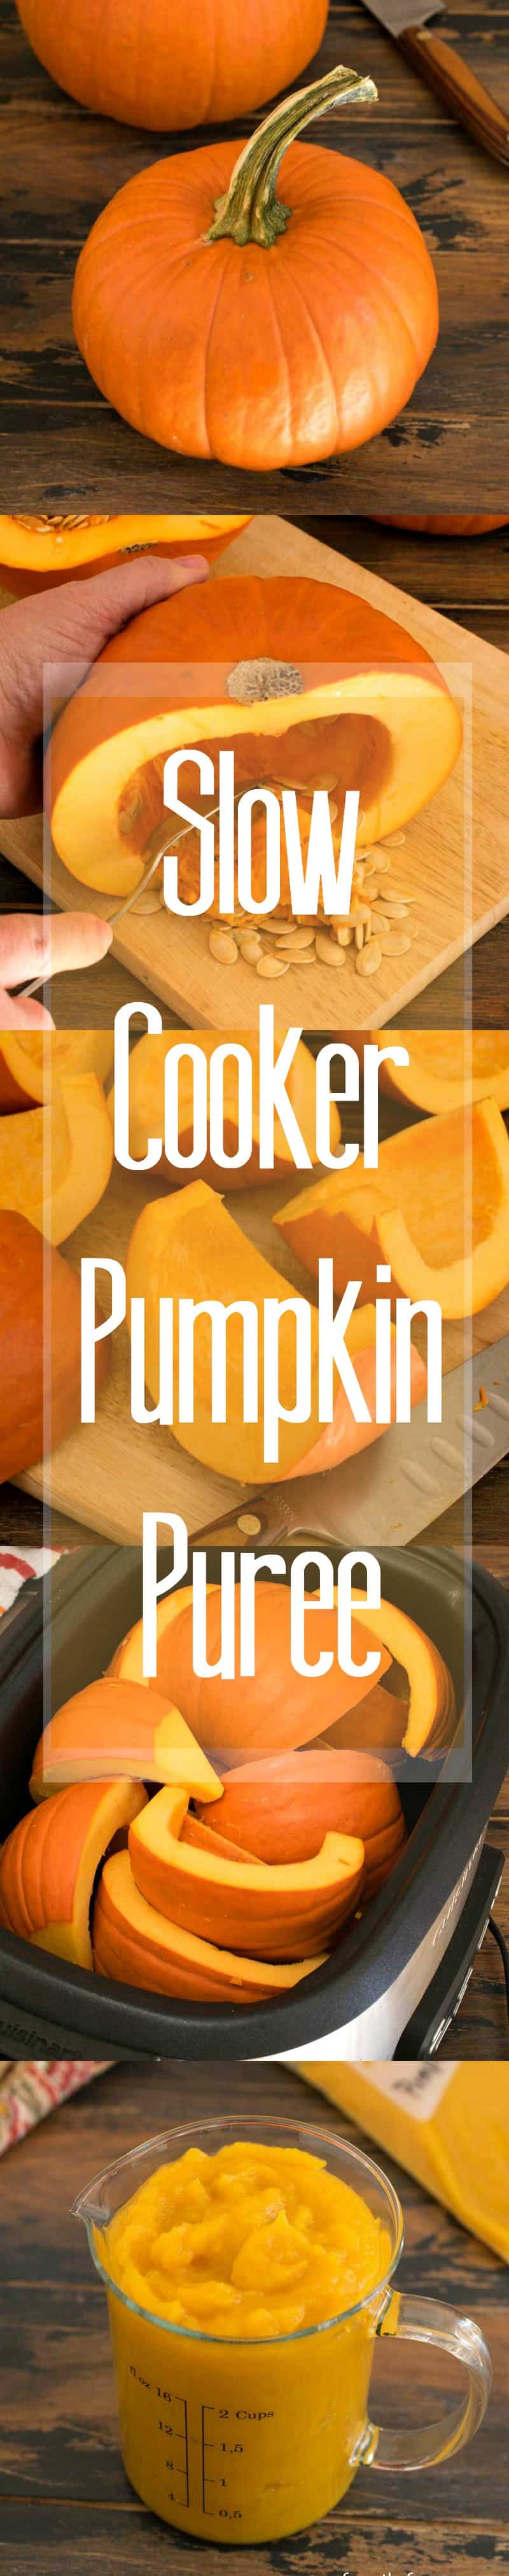 Slow Cooker Pumpkin Purée is super easy to make, and it tastes so much better than canned!